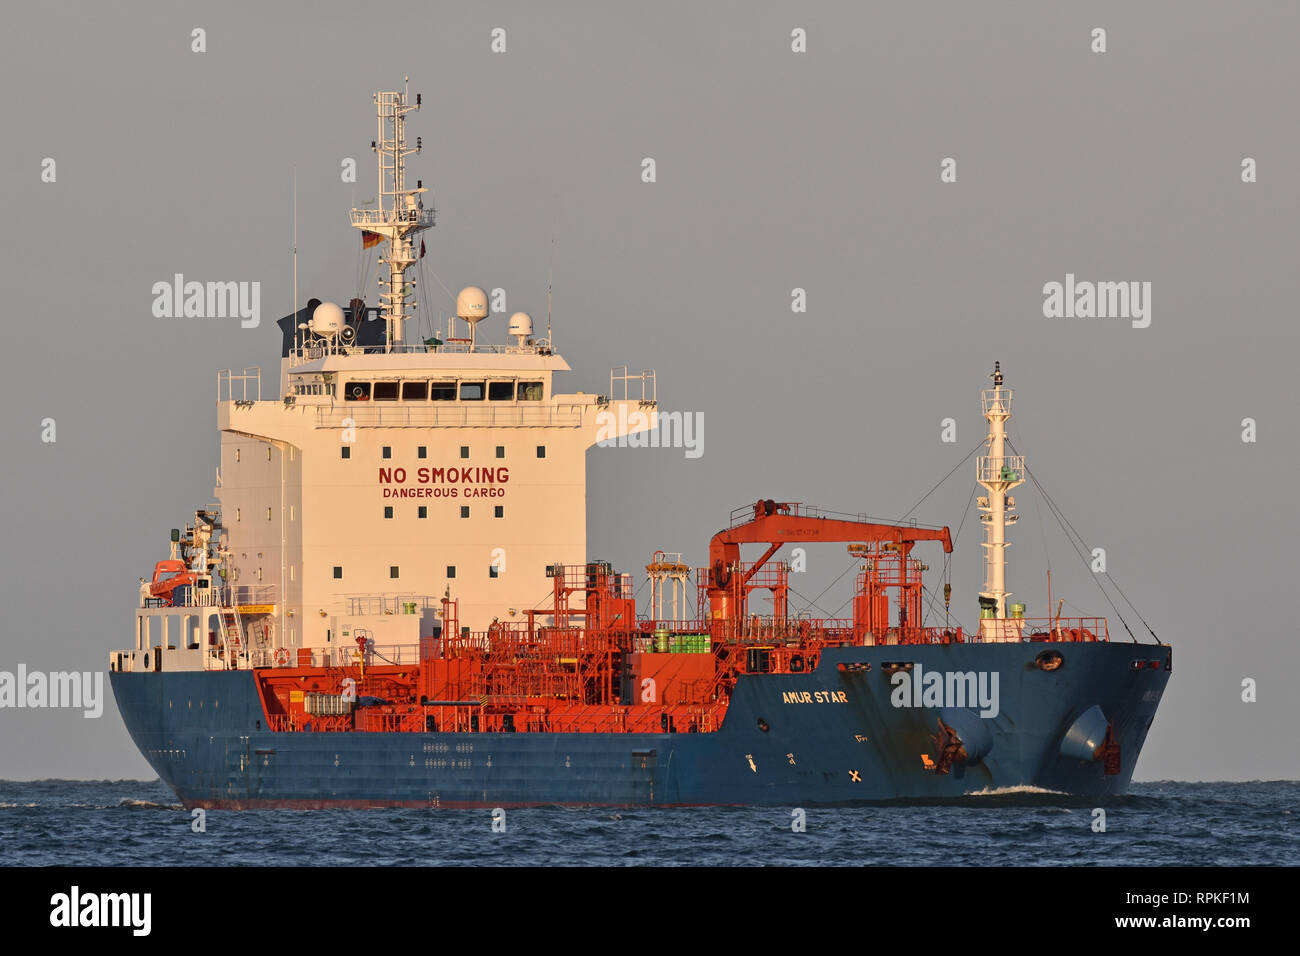 Chemical/Oil Products Tanker Amur Star Stock Photo